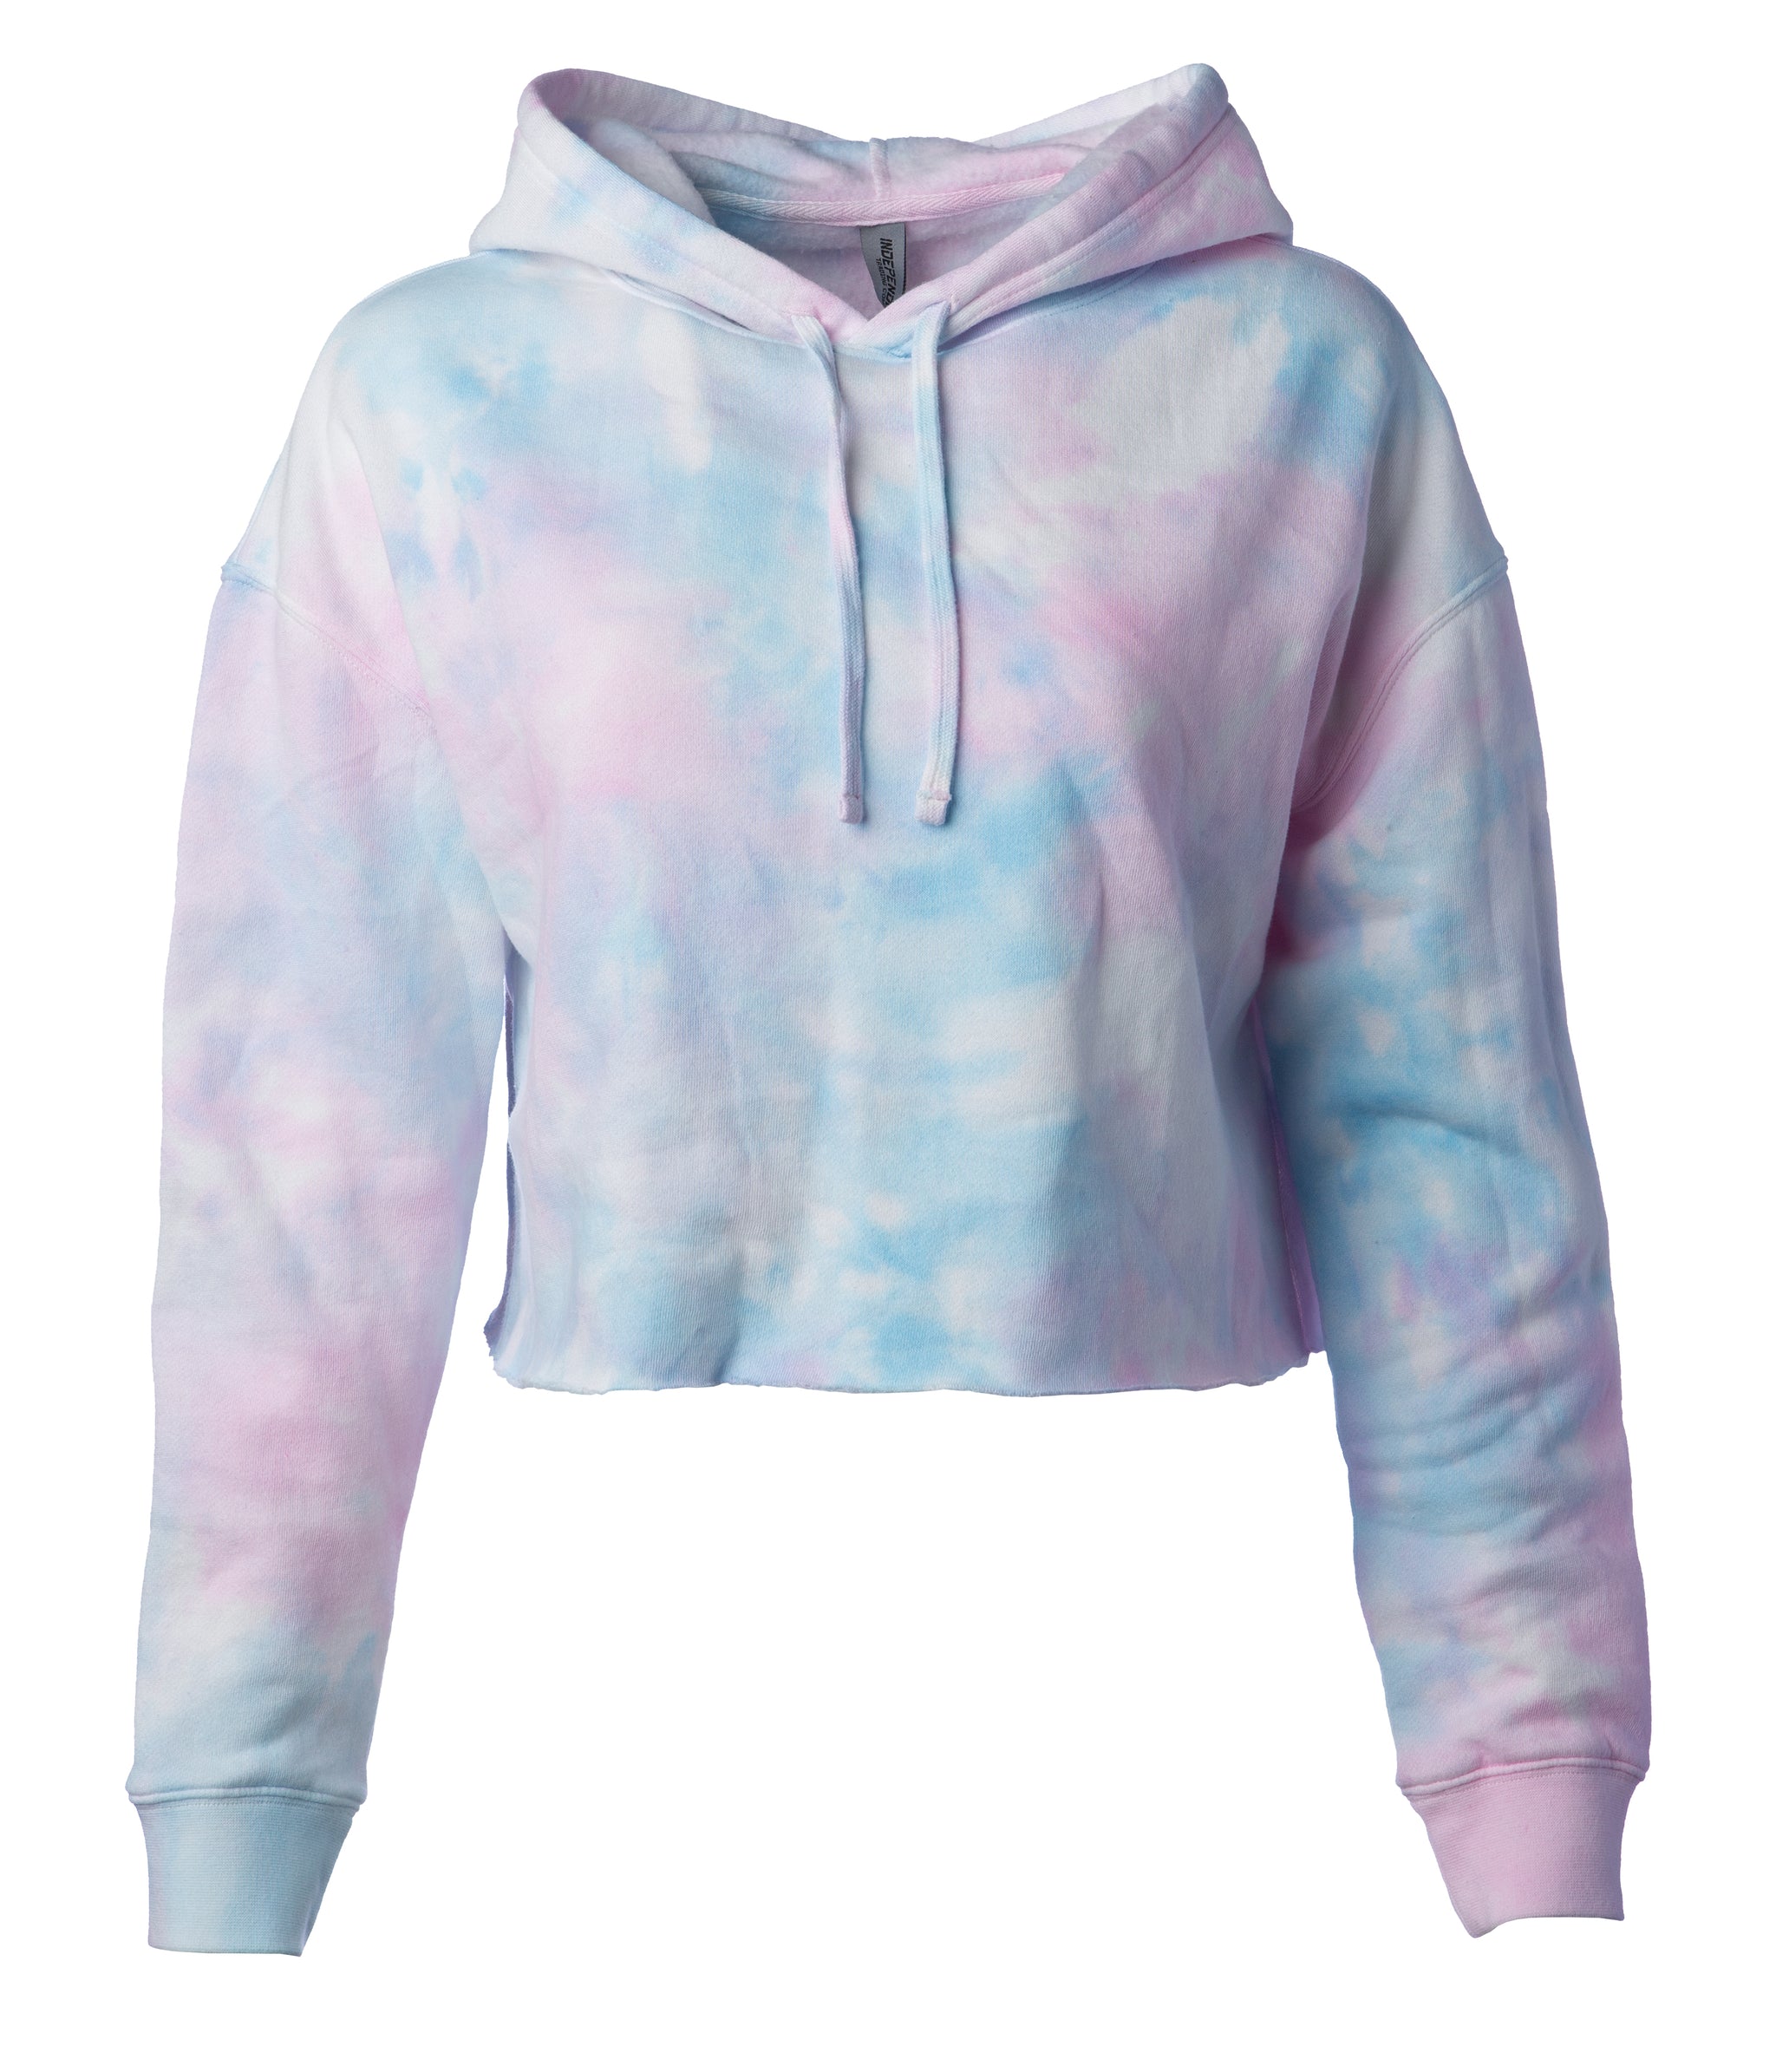 Independent Trading Co. PRM4500TD - Midweight Tie-Dyed Hooded Sweatshirt